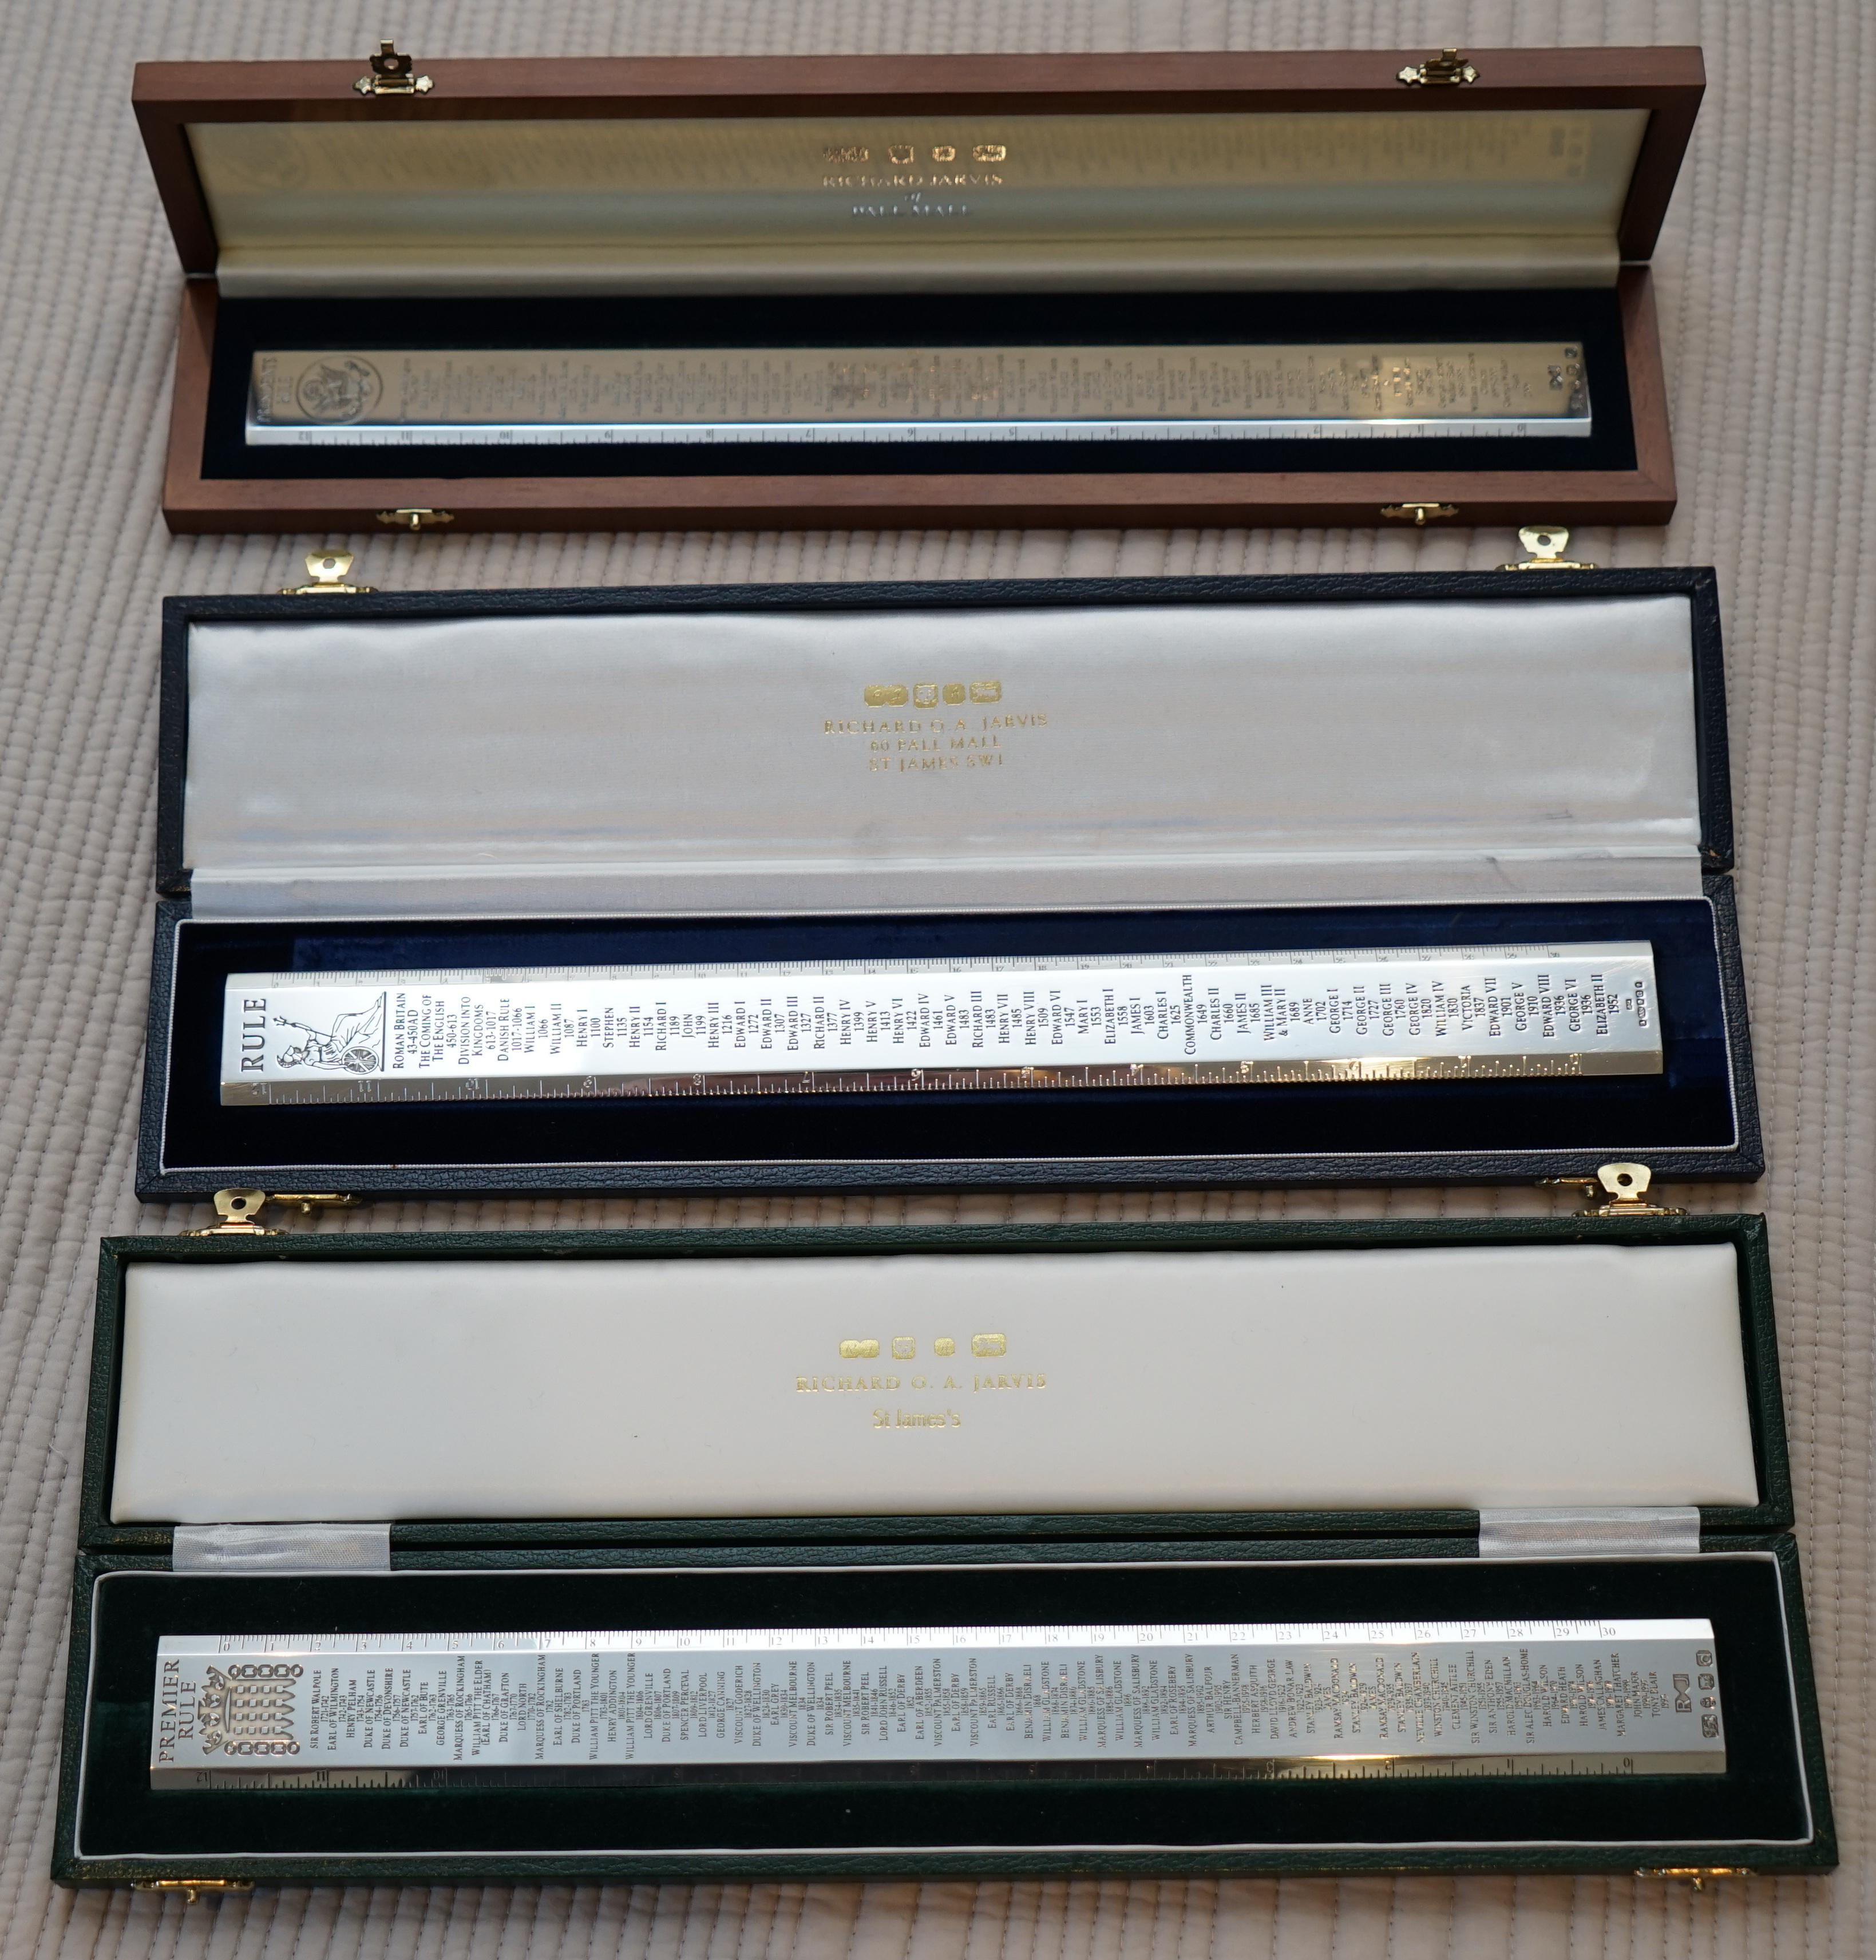 Wimbledon-Furniture

Wimbledon-Furniture is delighted to offer for sale, this stunning Limited Edition of 500 Richard Jarvis of Pall Mall. RRP £1100 Britannia Pure Silver 

American Presidents Rule, engraved with all the Prime Ministers from George